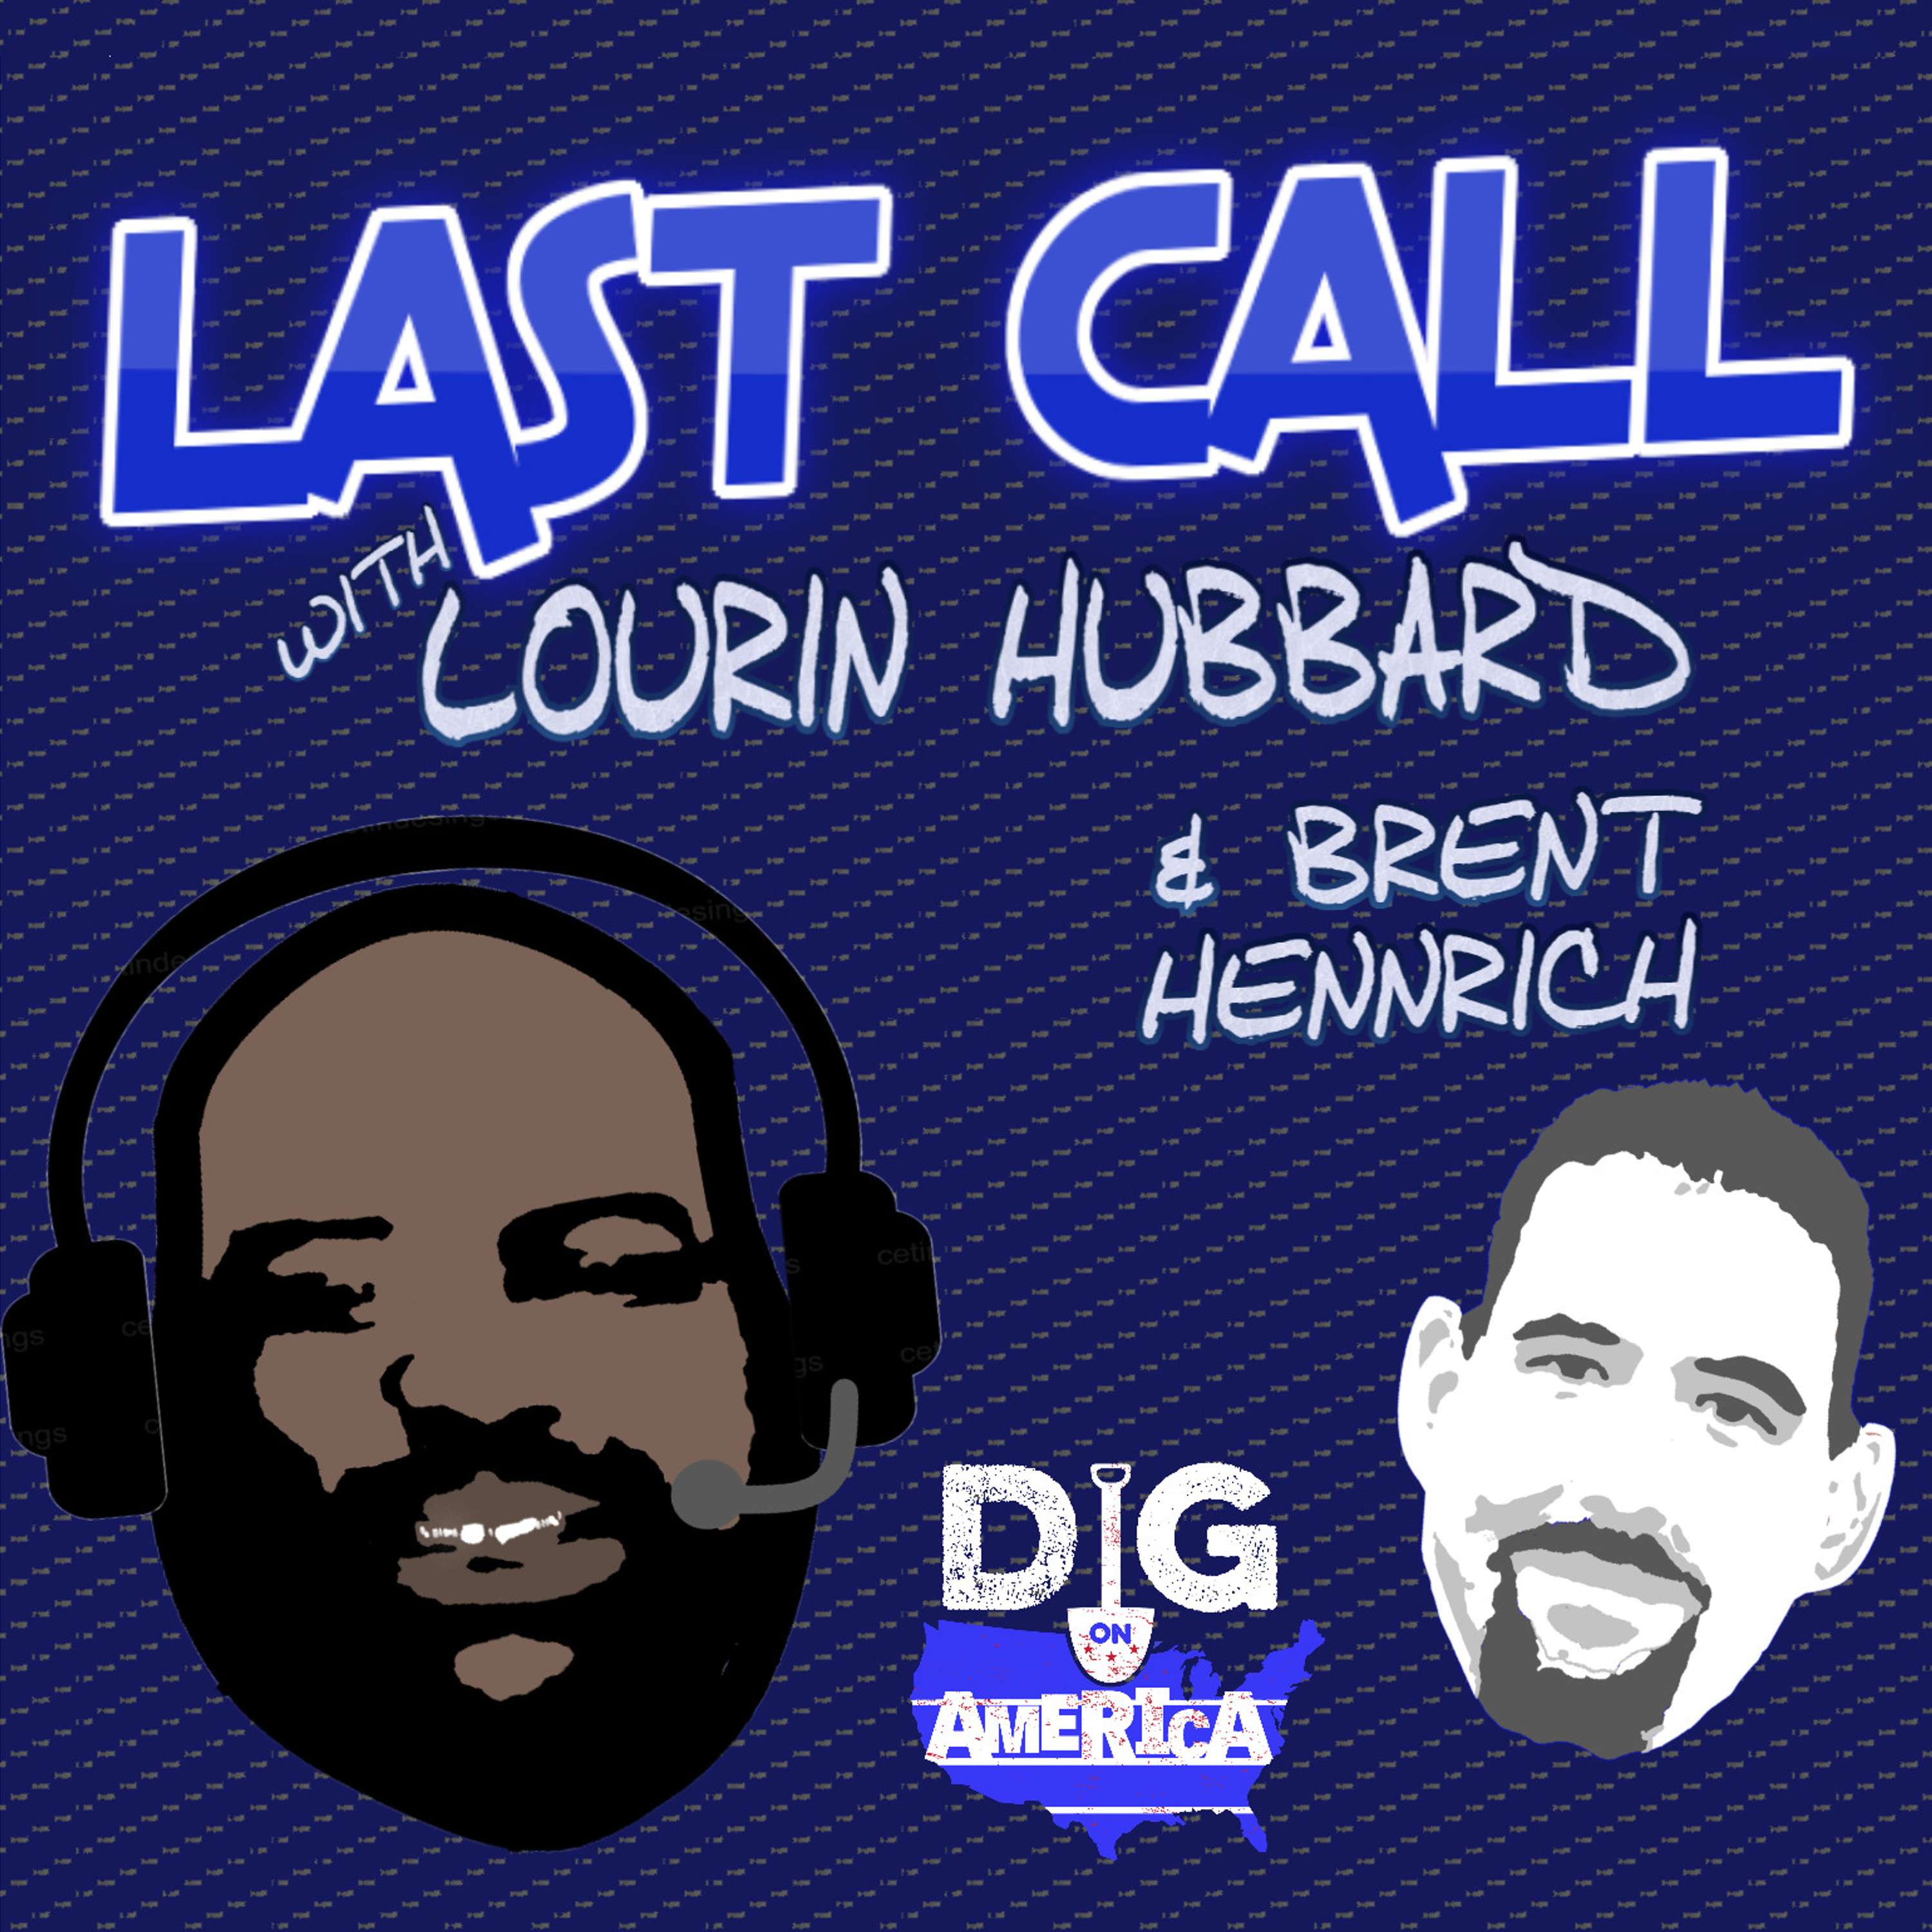 Last Call with Lourin Hubbard: Ty Ross